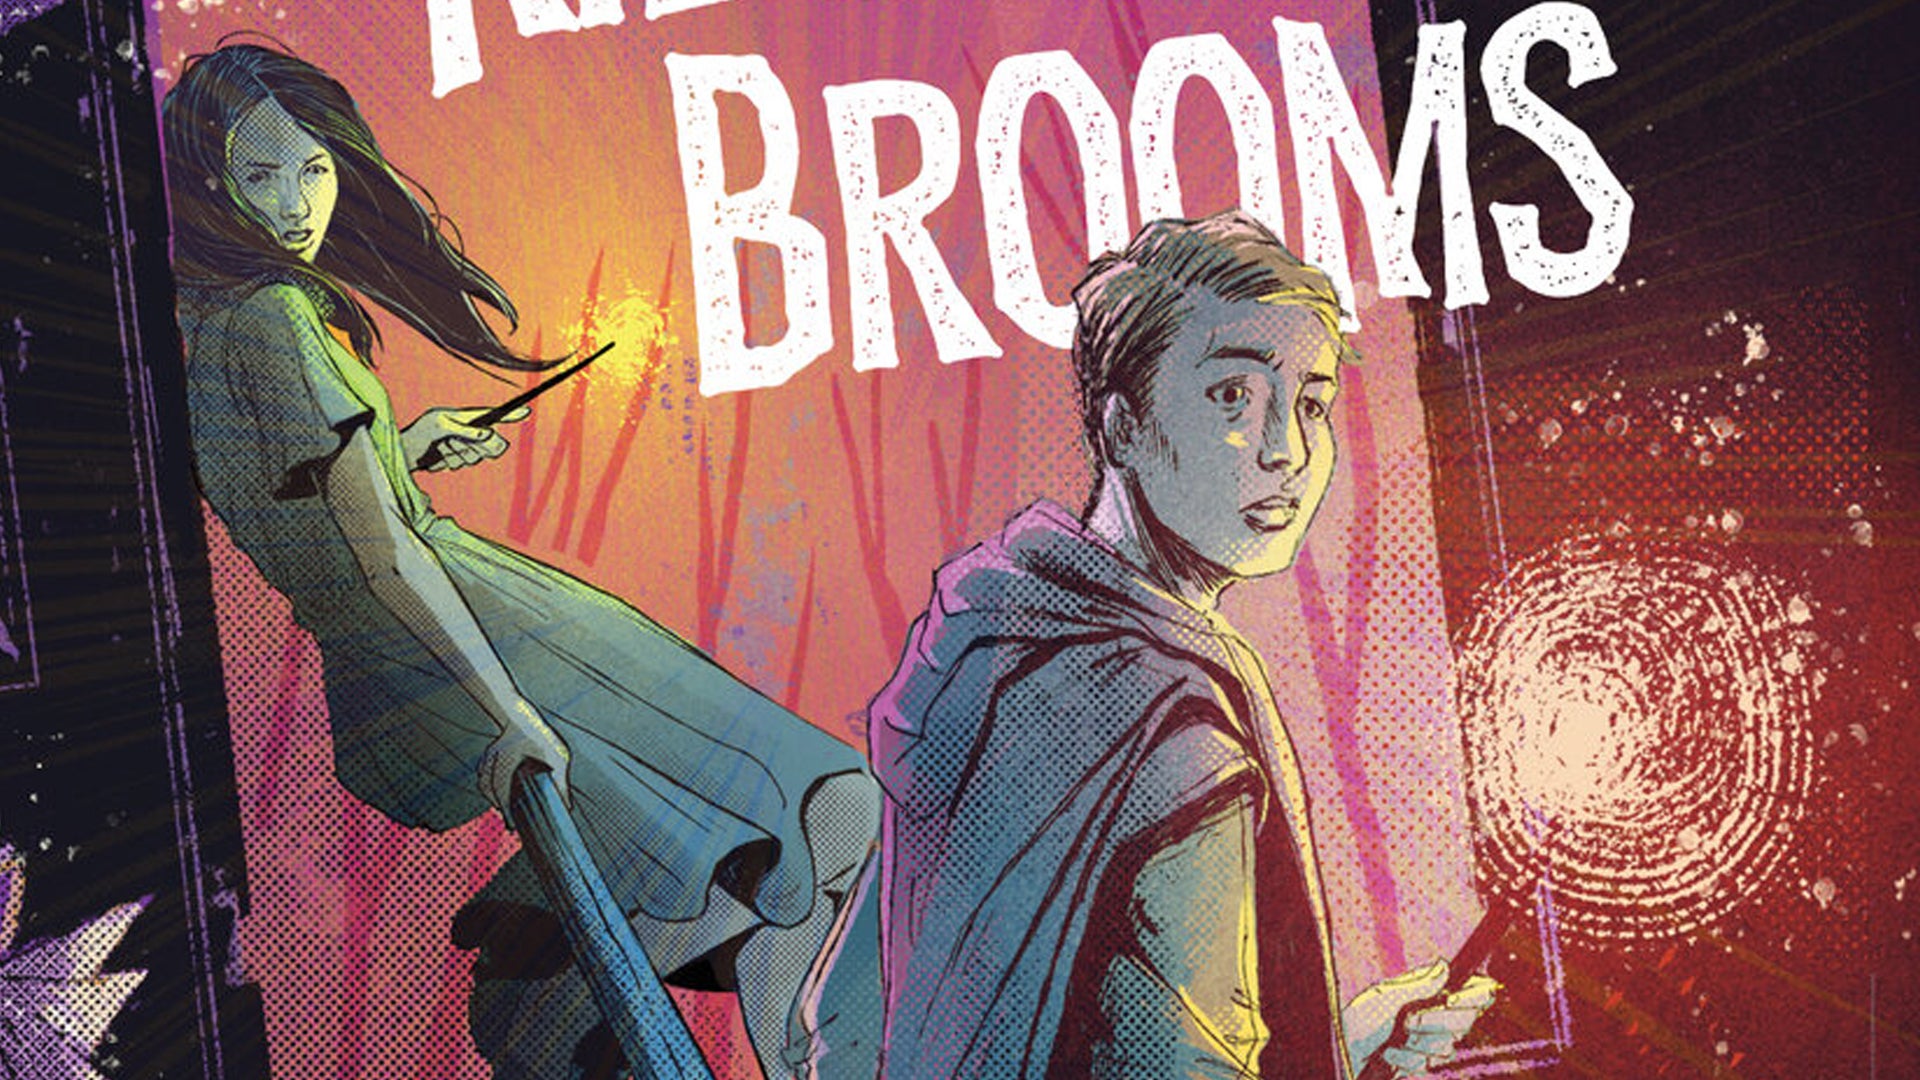 Image for Kids on Brooms